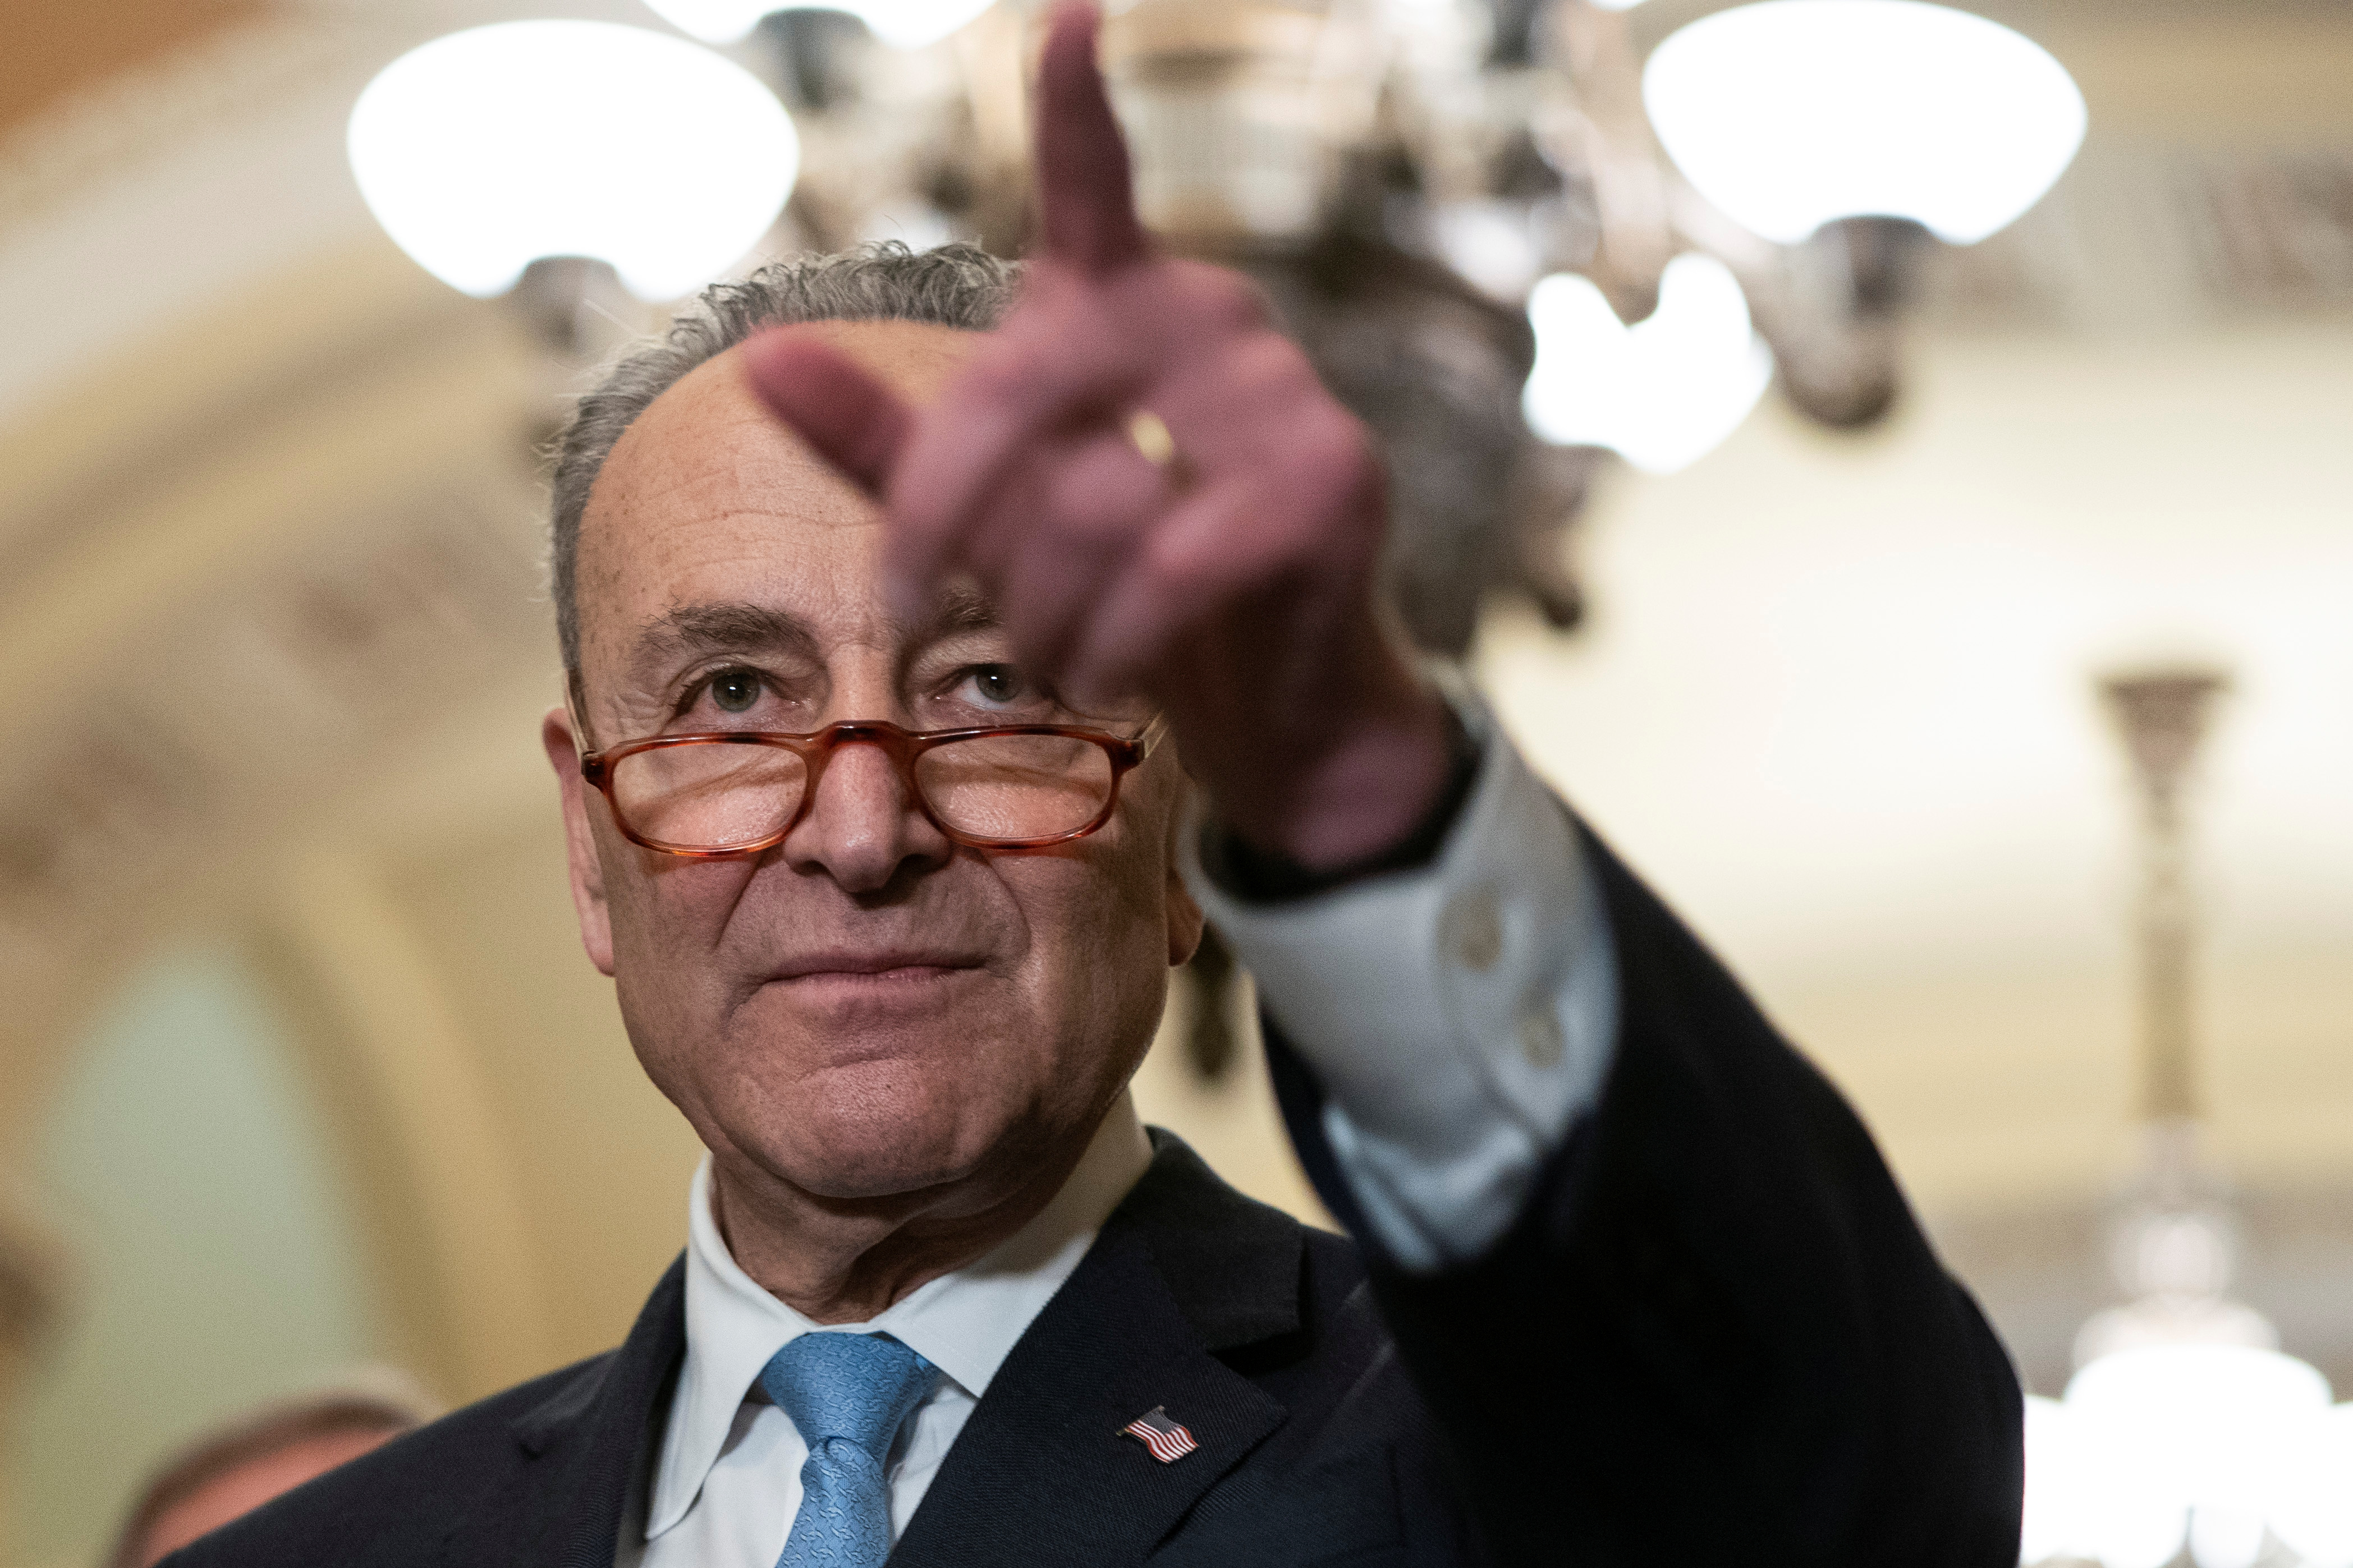 Senate Minority Leader Chuck Schumer (D-NY) speaks to the media after a Senate Democratic Caucus lunch on Capitol Hill in Washington, U.S., February 5, 2019. REUTERS/Joshua Roberts